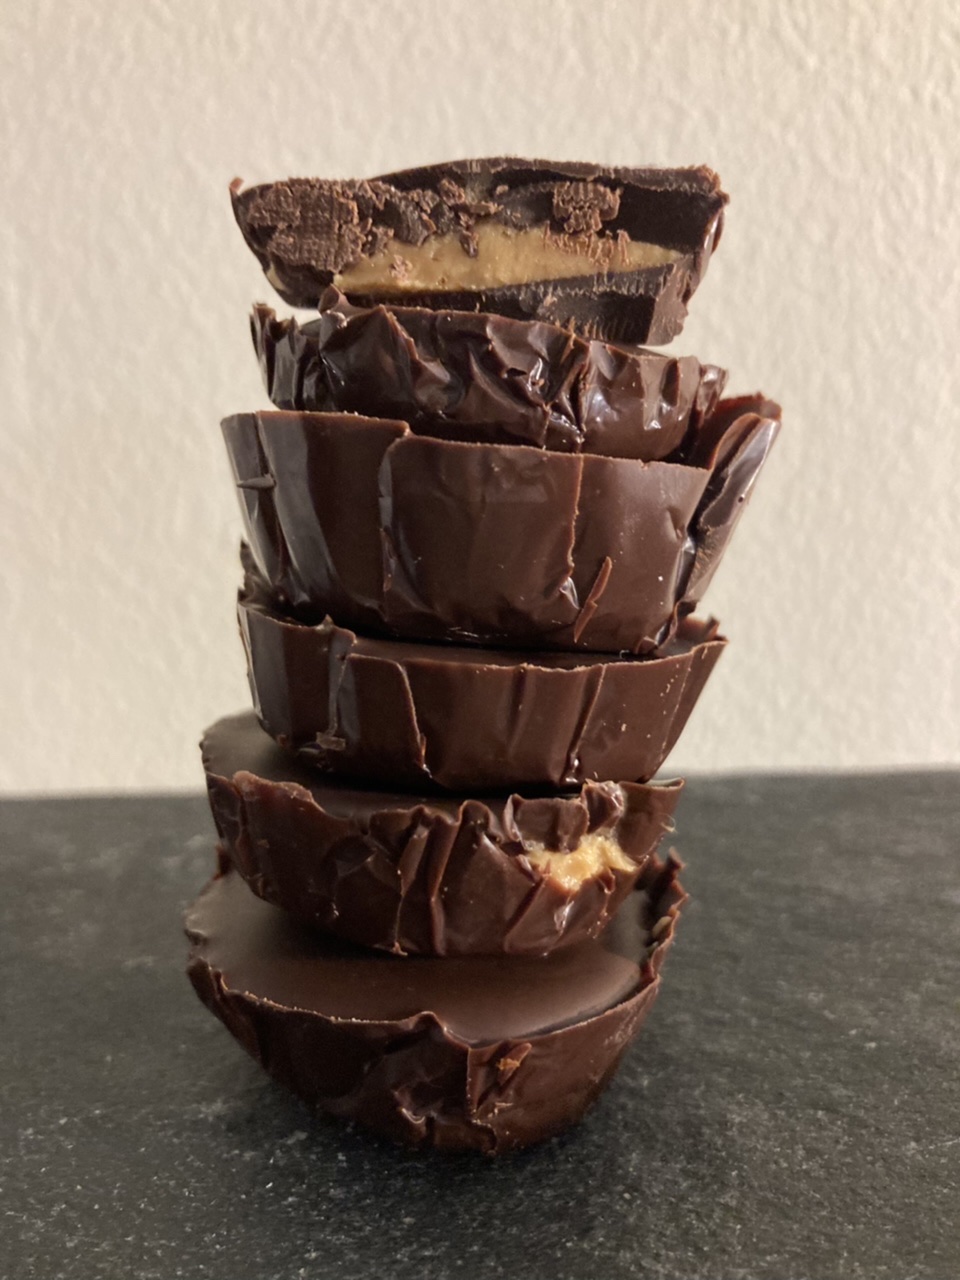 72% Cacao Dark Chocolate Nut Butter Cups 